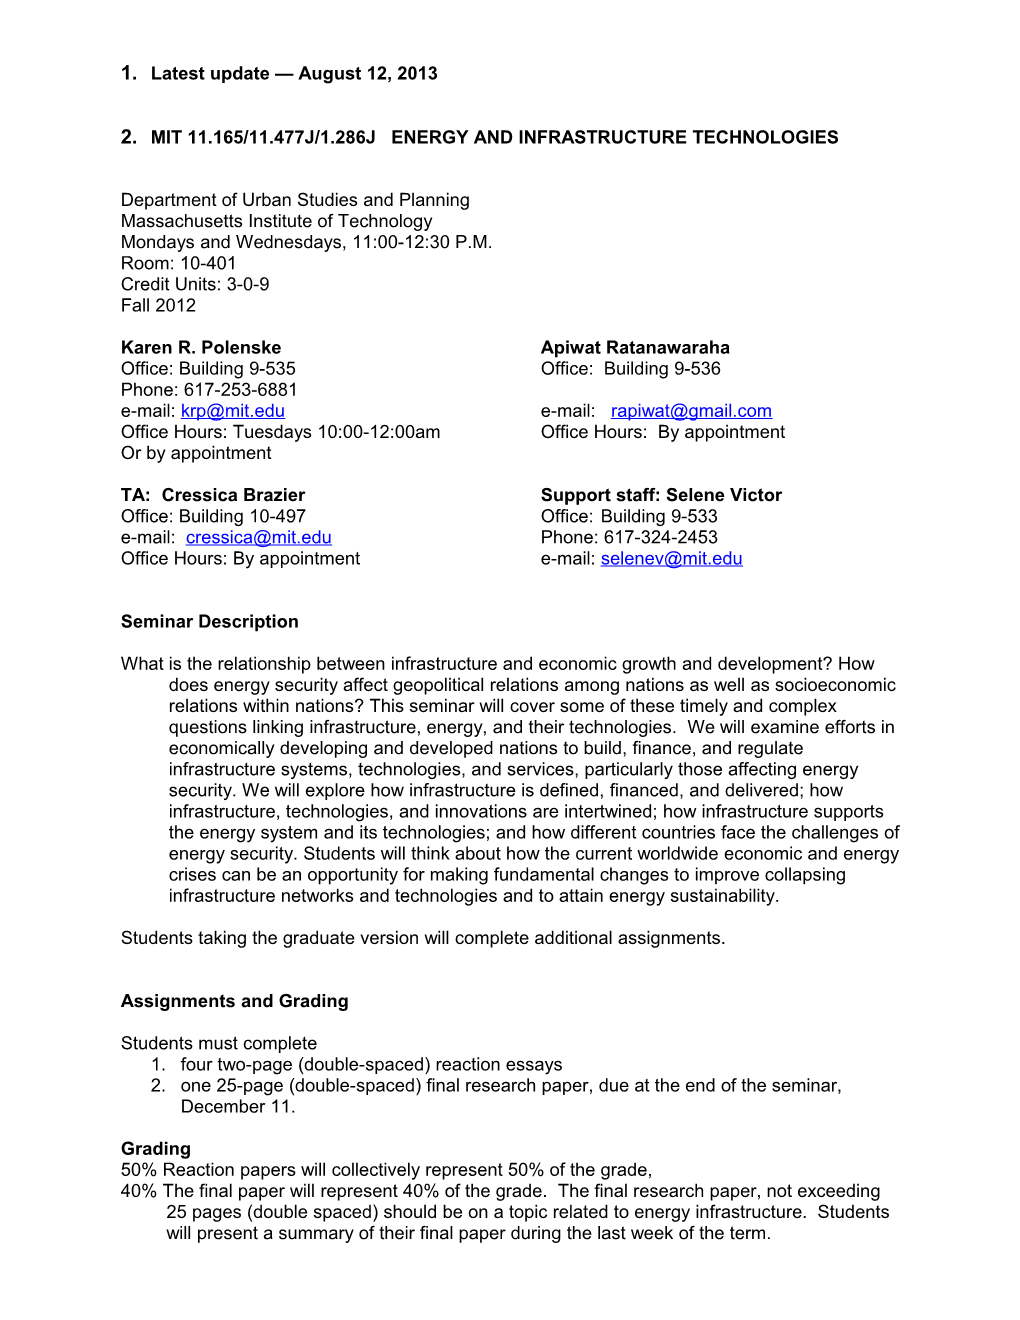 MIT 11.165/11.477J/1.286J Energy and Infrastructure Technologies